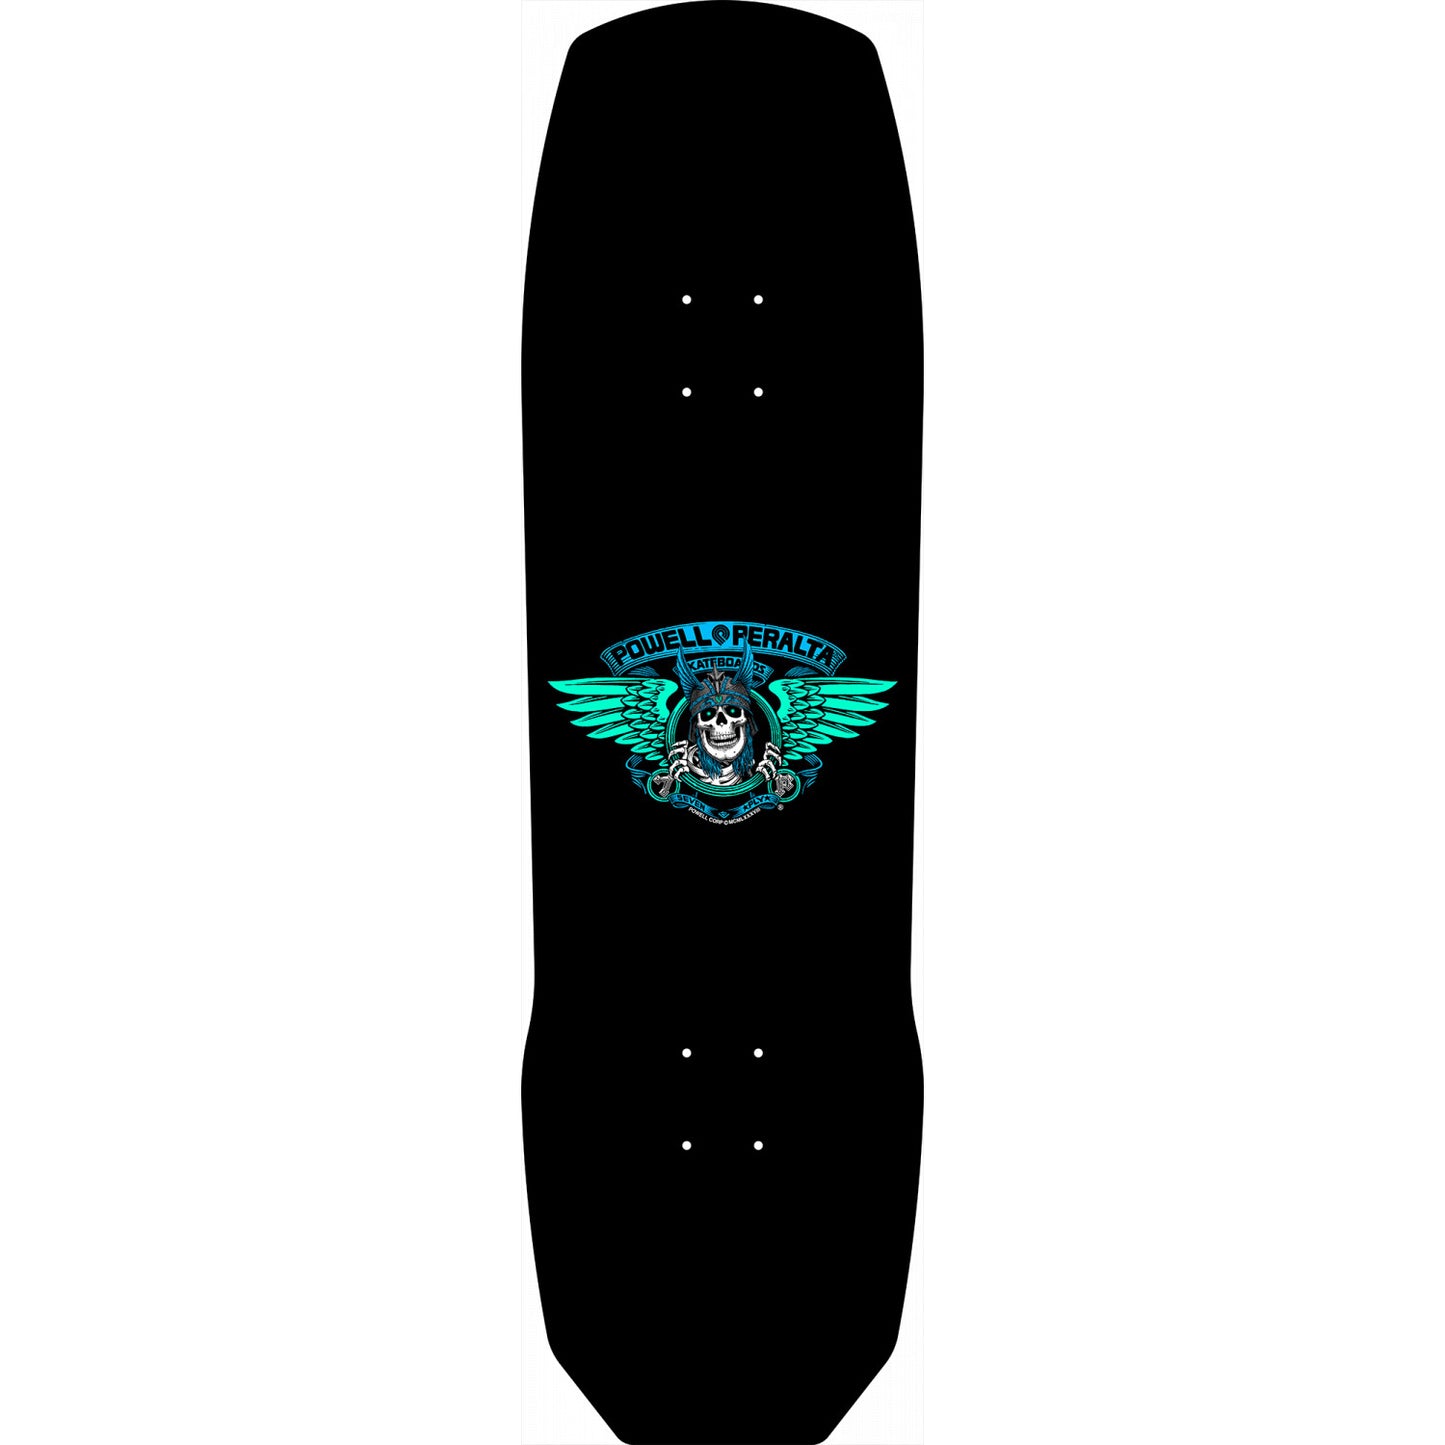 Powell Peralta Pro Andy Anderson Heron Skull Black/Teal 9.13 x 32.8" Shaped Skateboard Deck